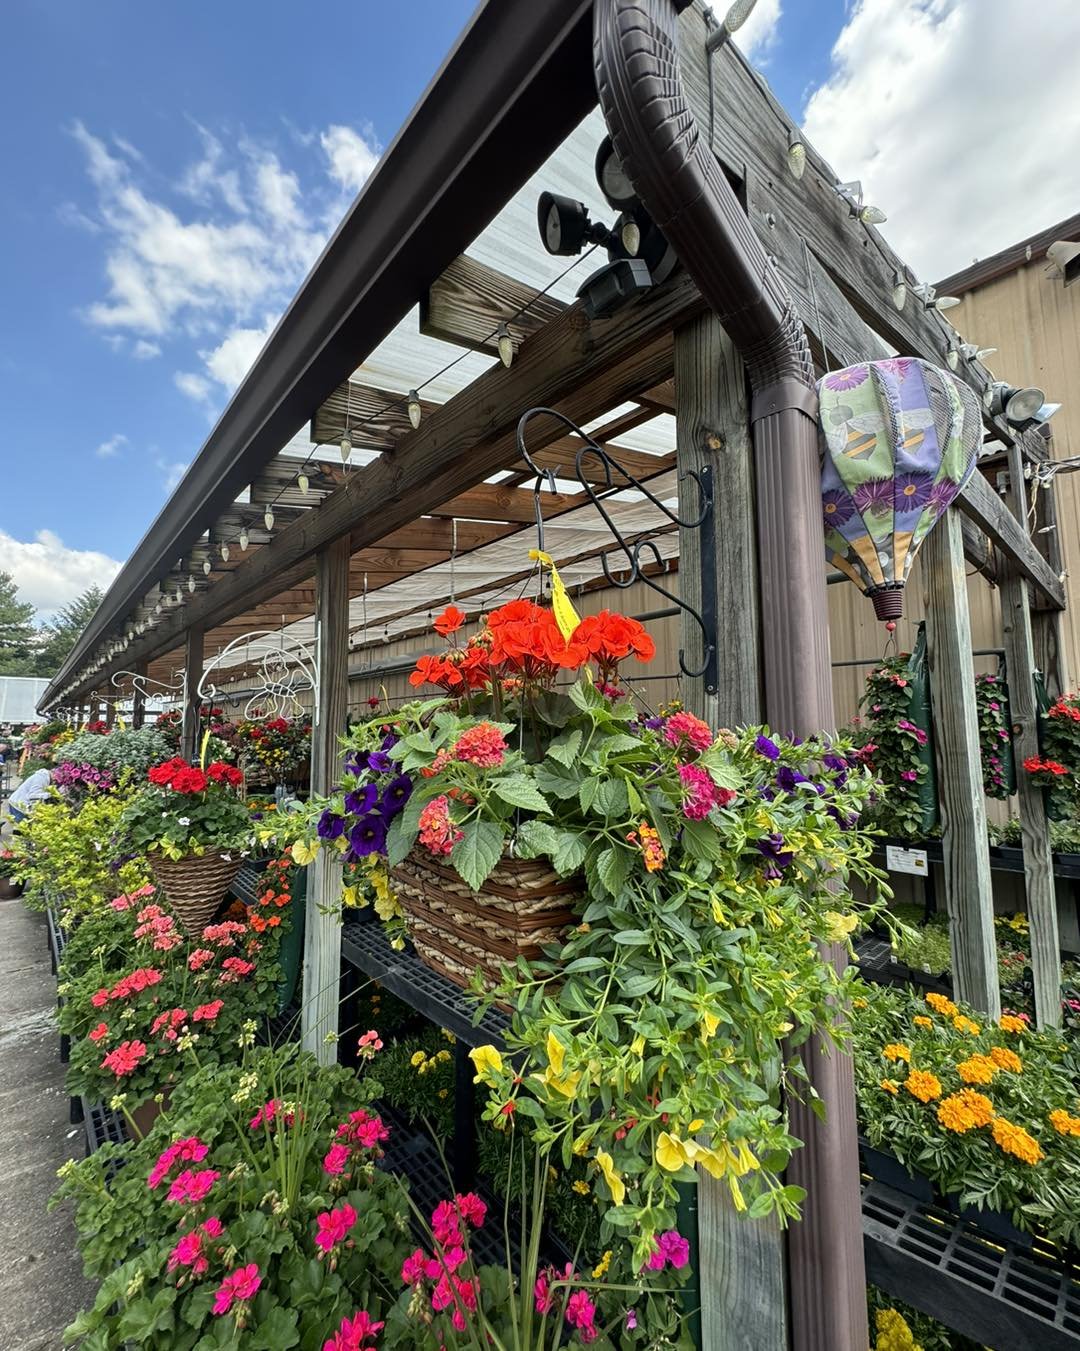 We are weekend ready and have the perfect gift for mom!
.
Whether it&rsquo;s a patio pot, blooming basket or pretty perennial we have what she&rsquo;ll love!